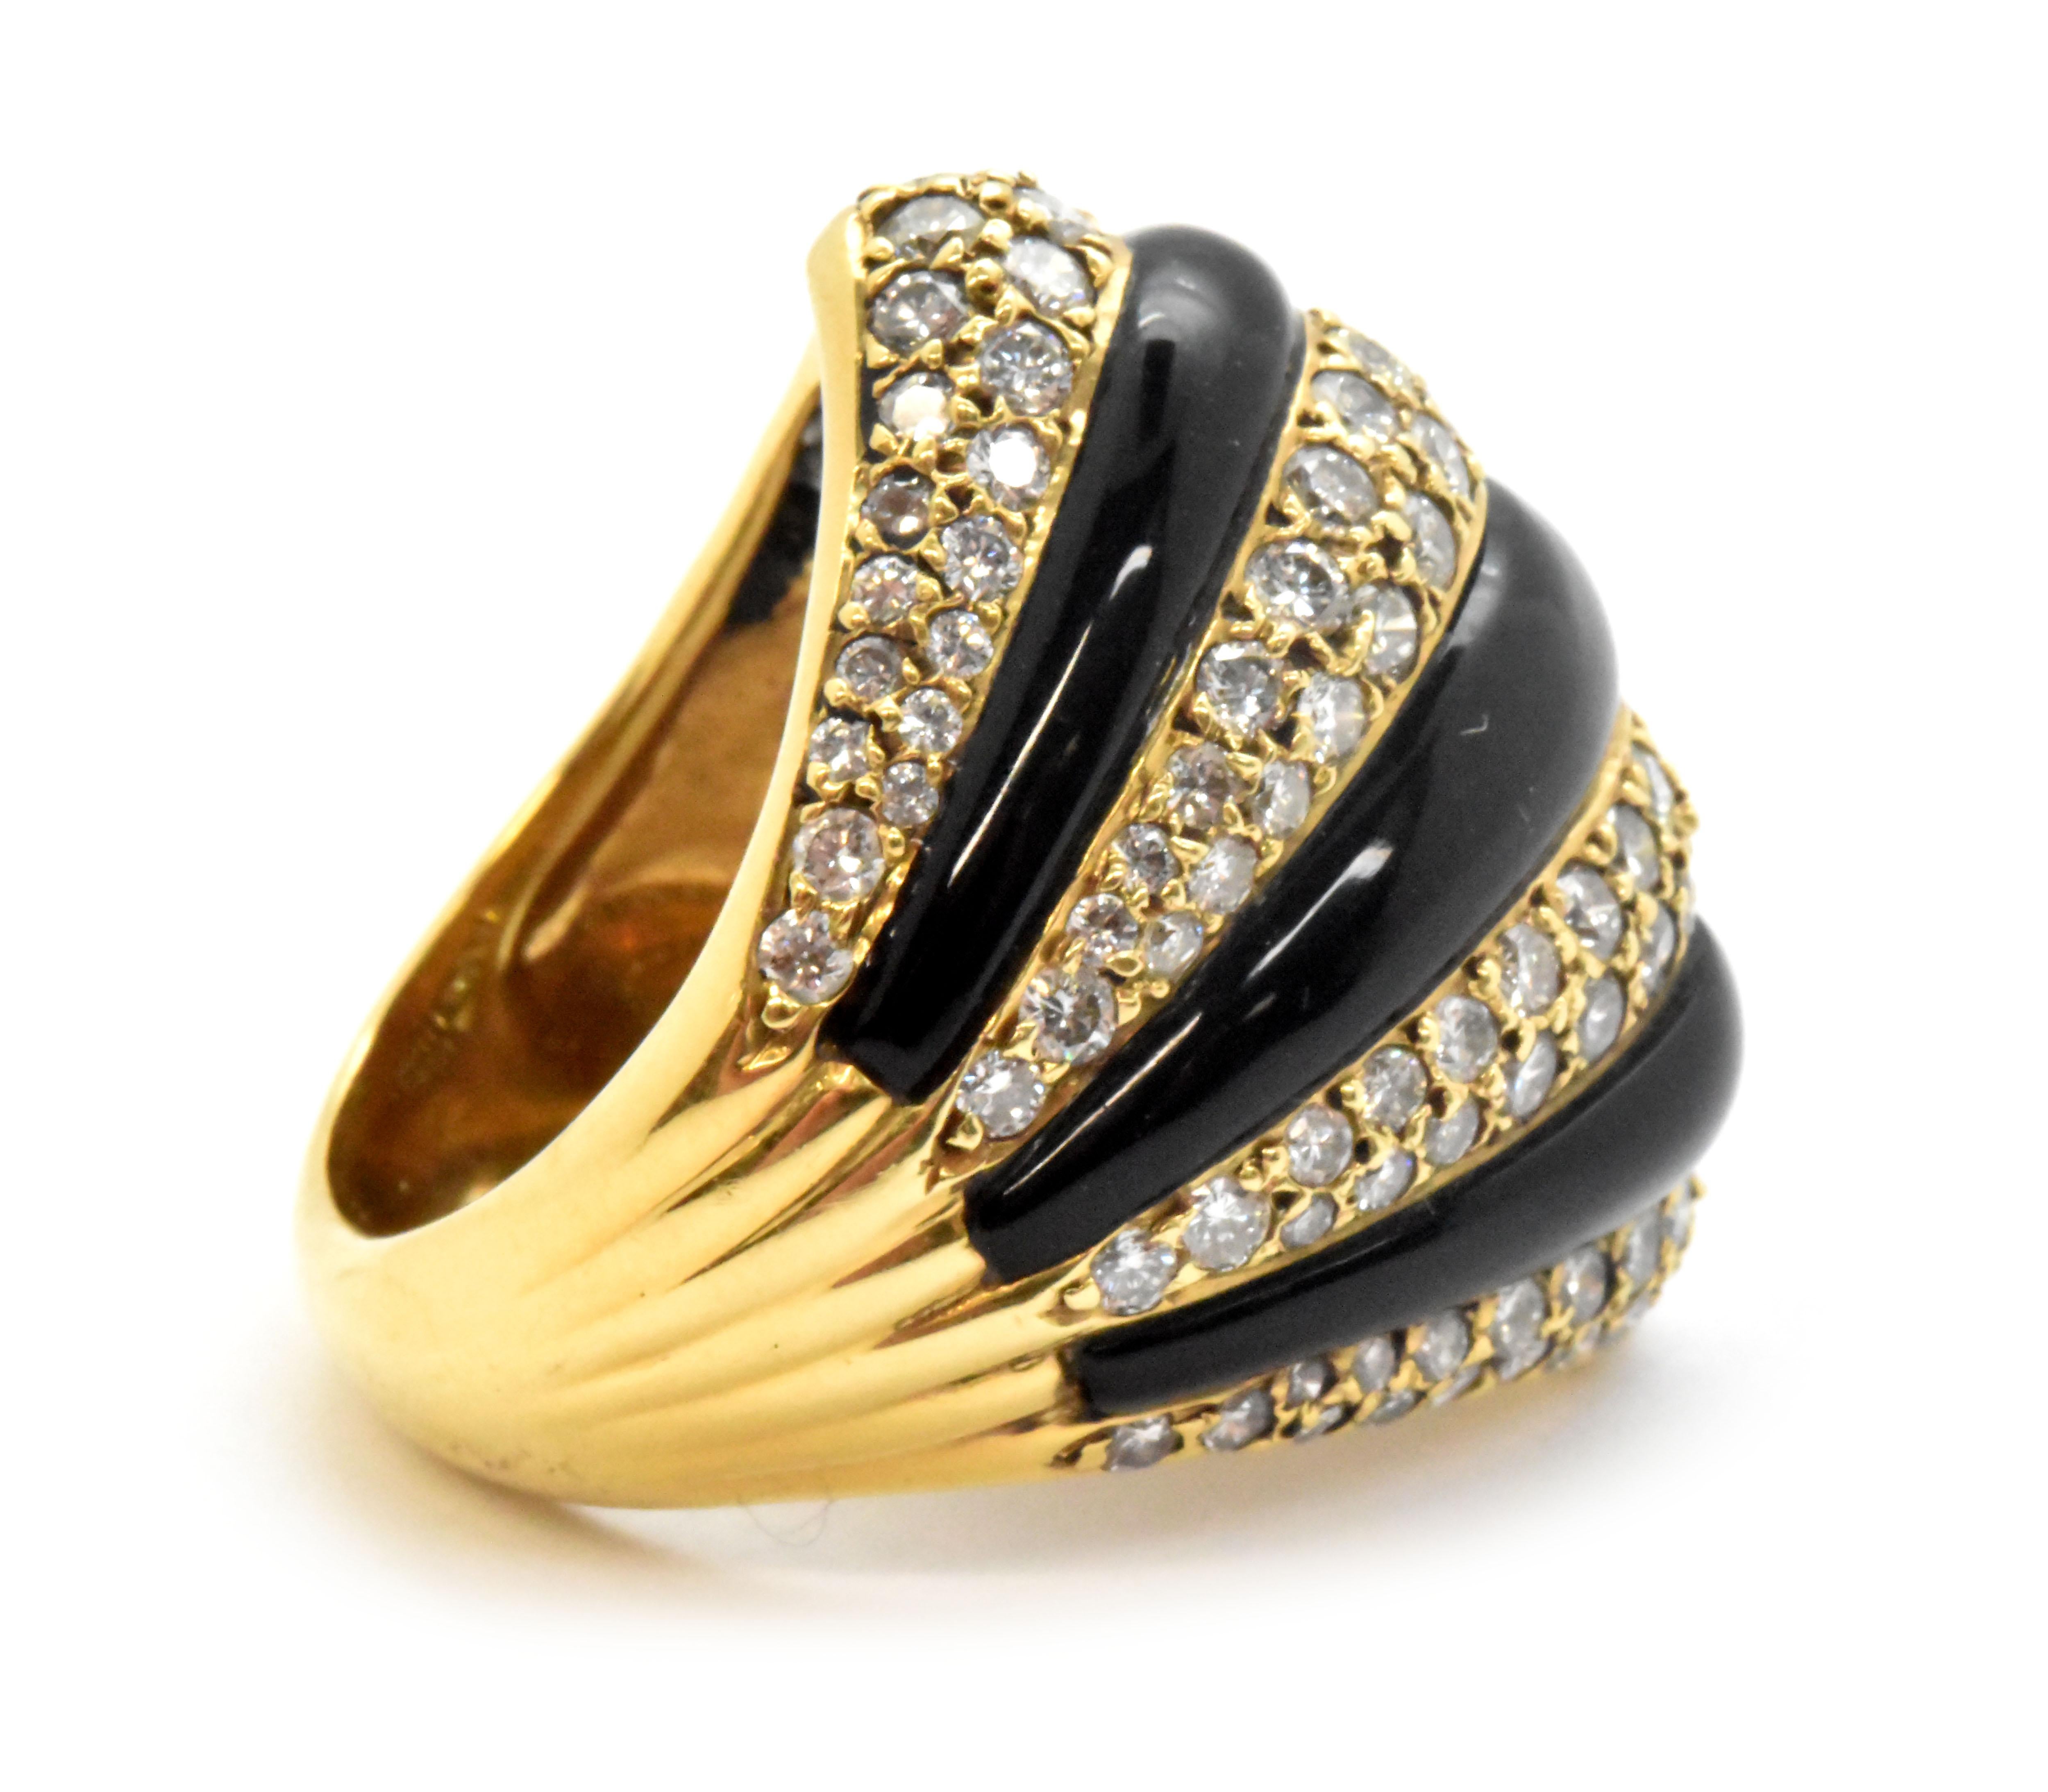 This ring is made in 18k yellow gold, and it is set with diamonds and onyx. The diamonds have a total weight of 2.80 carats, and the stones are graded G in color and VS in clarity. The ring measures 27mm wide, and it sits up 7mm high off of the